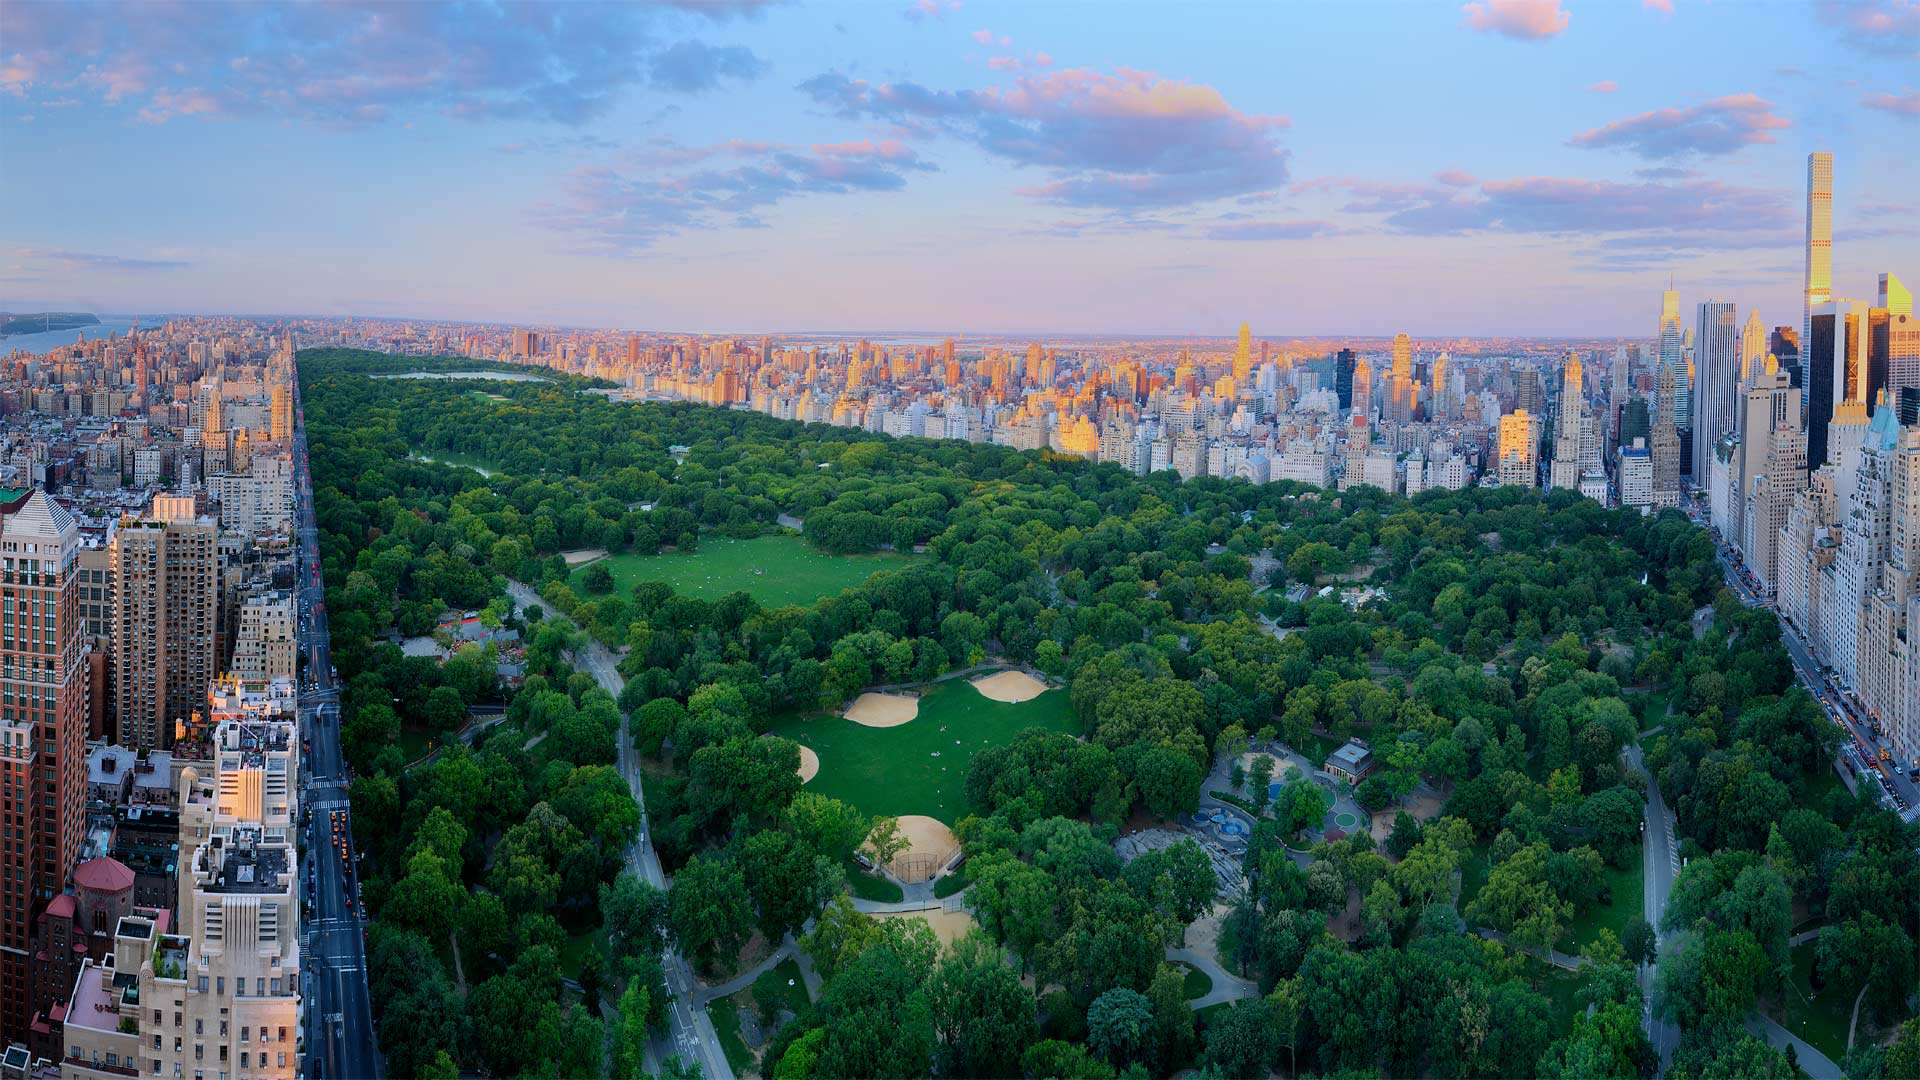 Central Park, New York City - Tony Shi Photography/Getty Images)